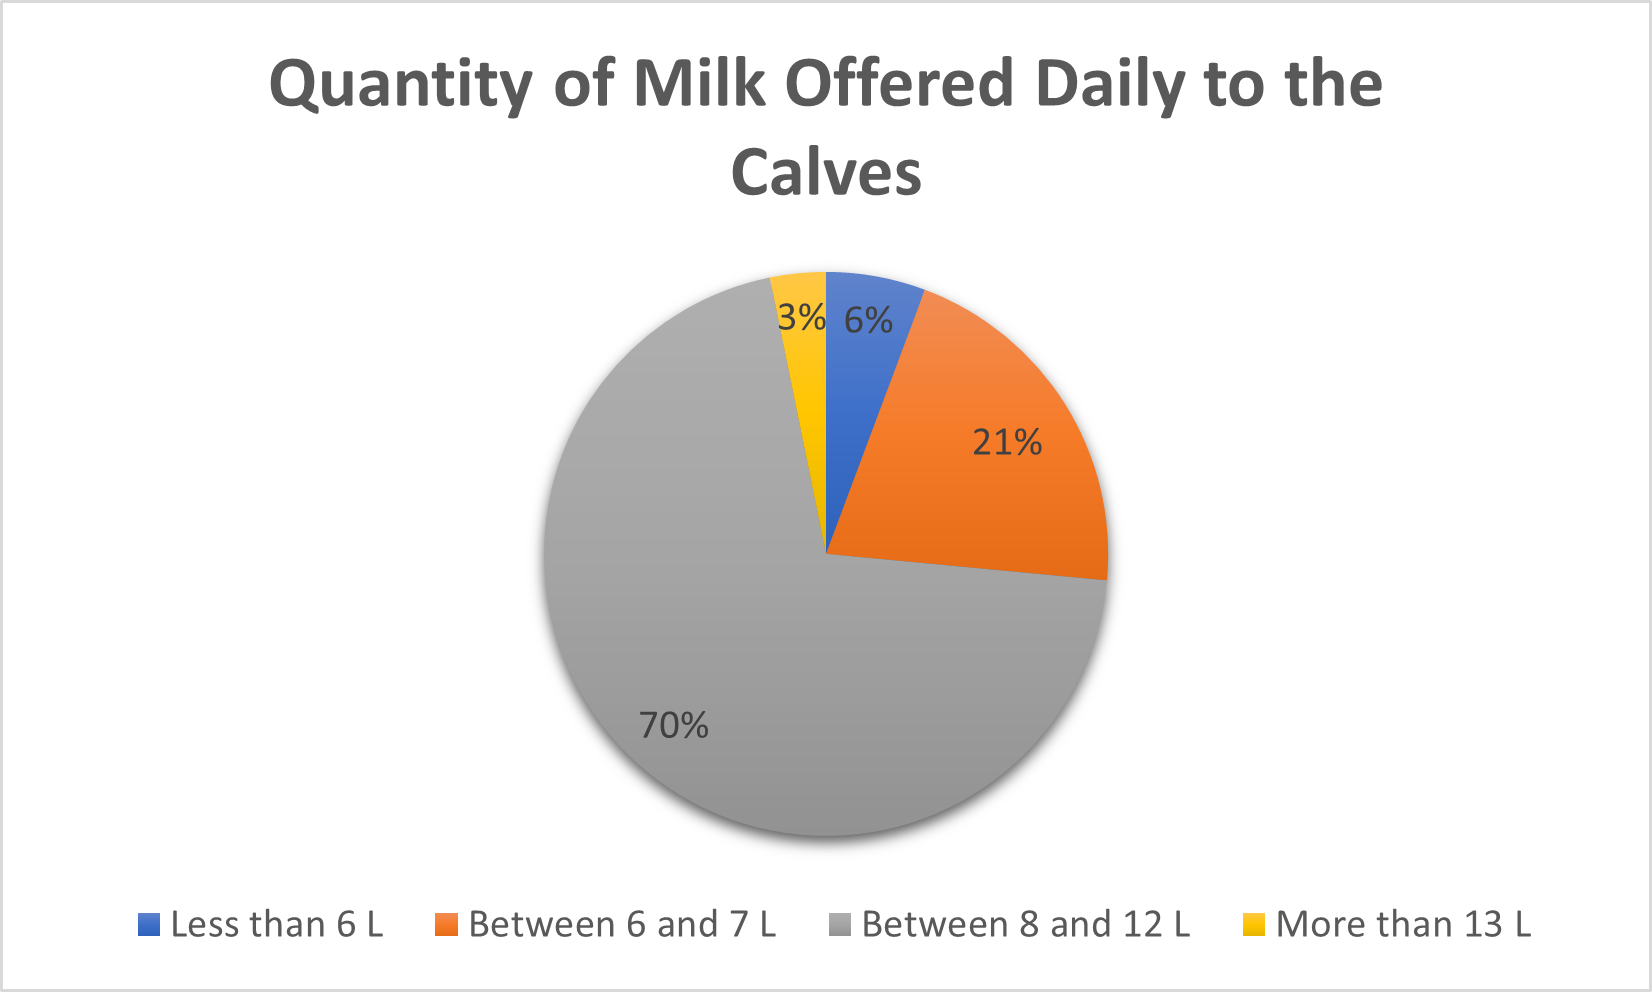 Quantity of Milk Offered Daily to the Calves